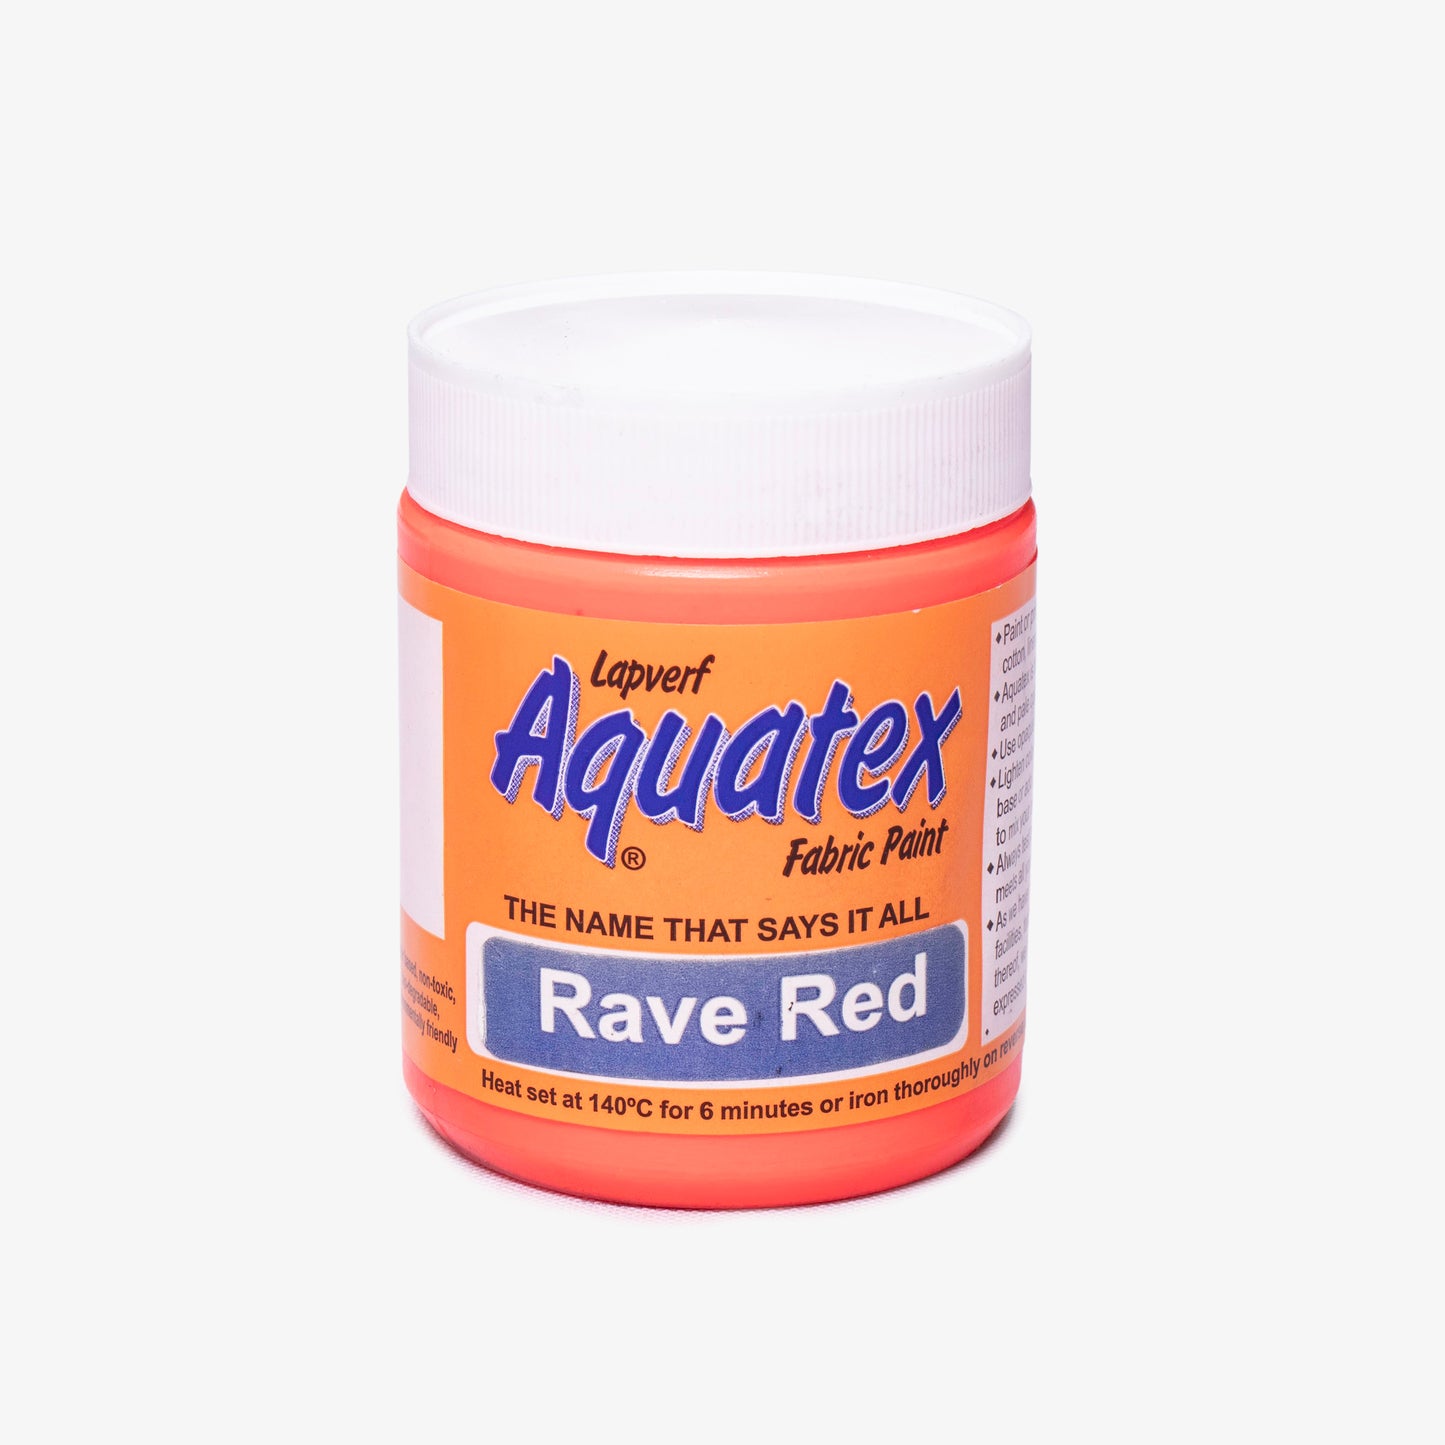 Fabric Paint Rave Red 100g